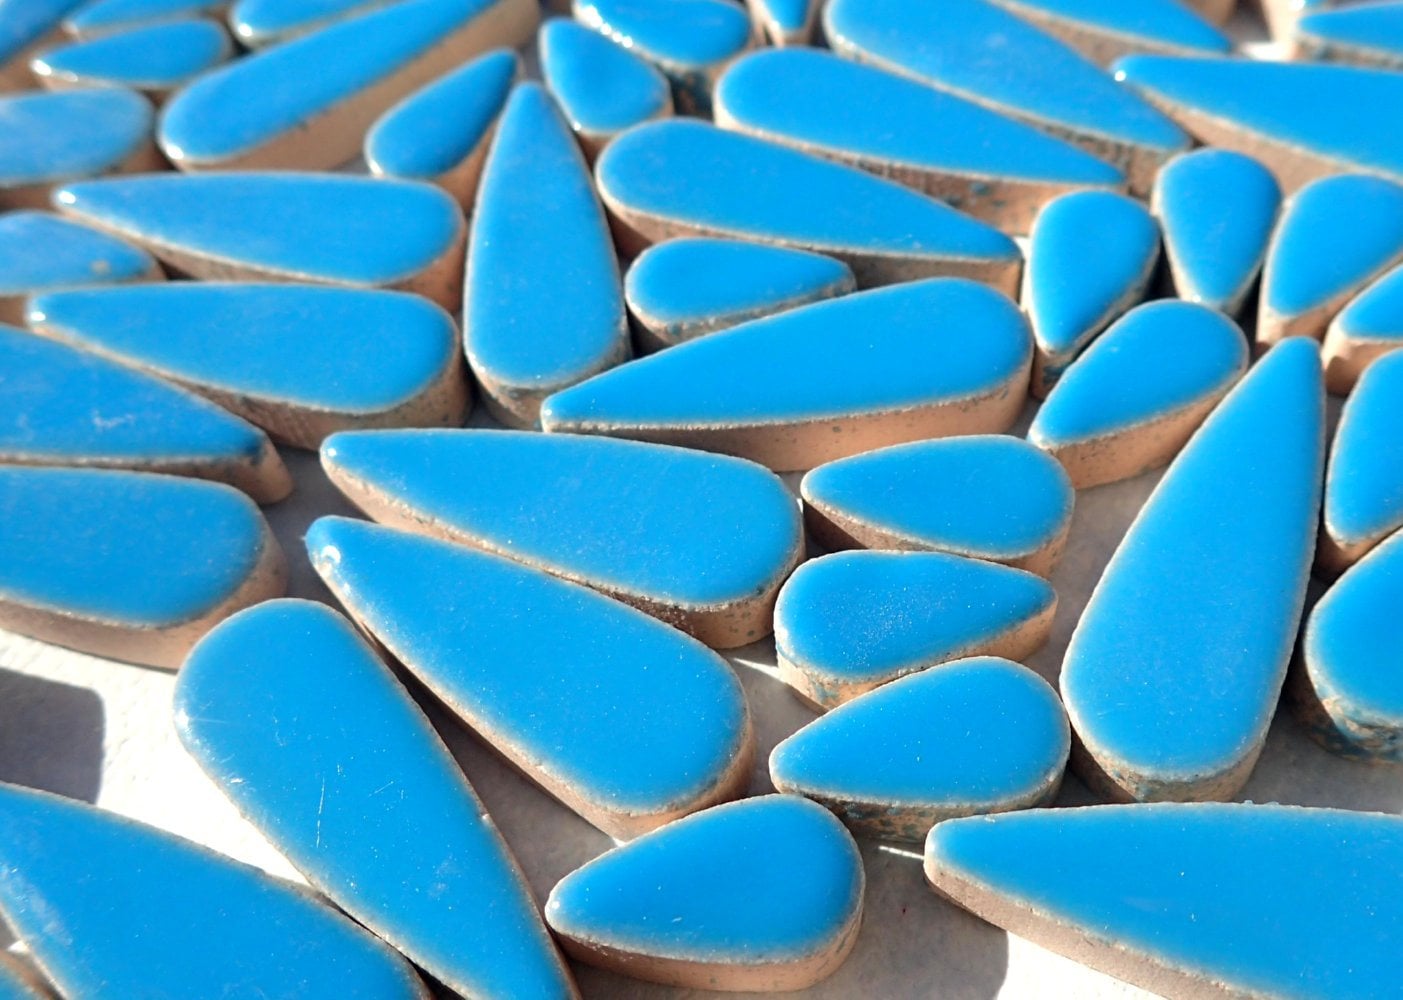 Mediterranean Blue Teardrop Mosaic Tiles - 50g Ceramic Petals in Mix of 2 Sizes 1/2" and 3/5" in Thalo Blue